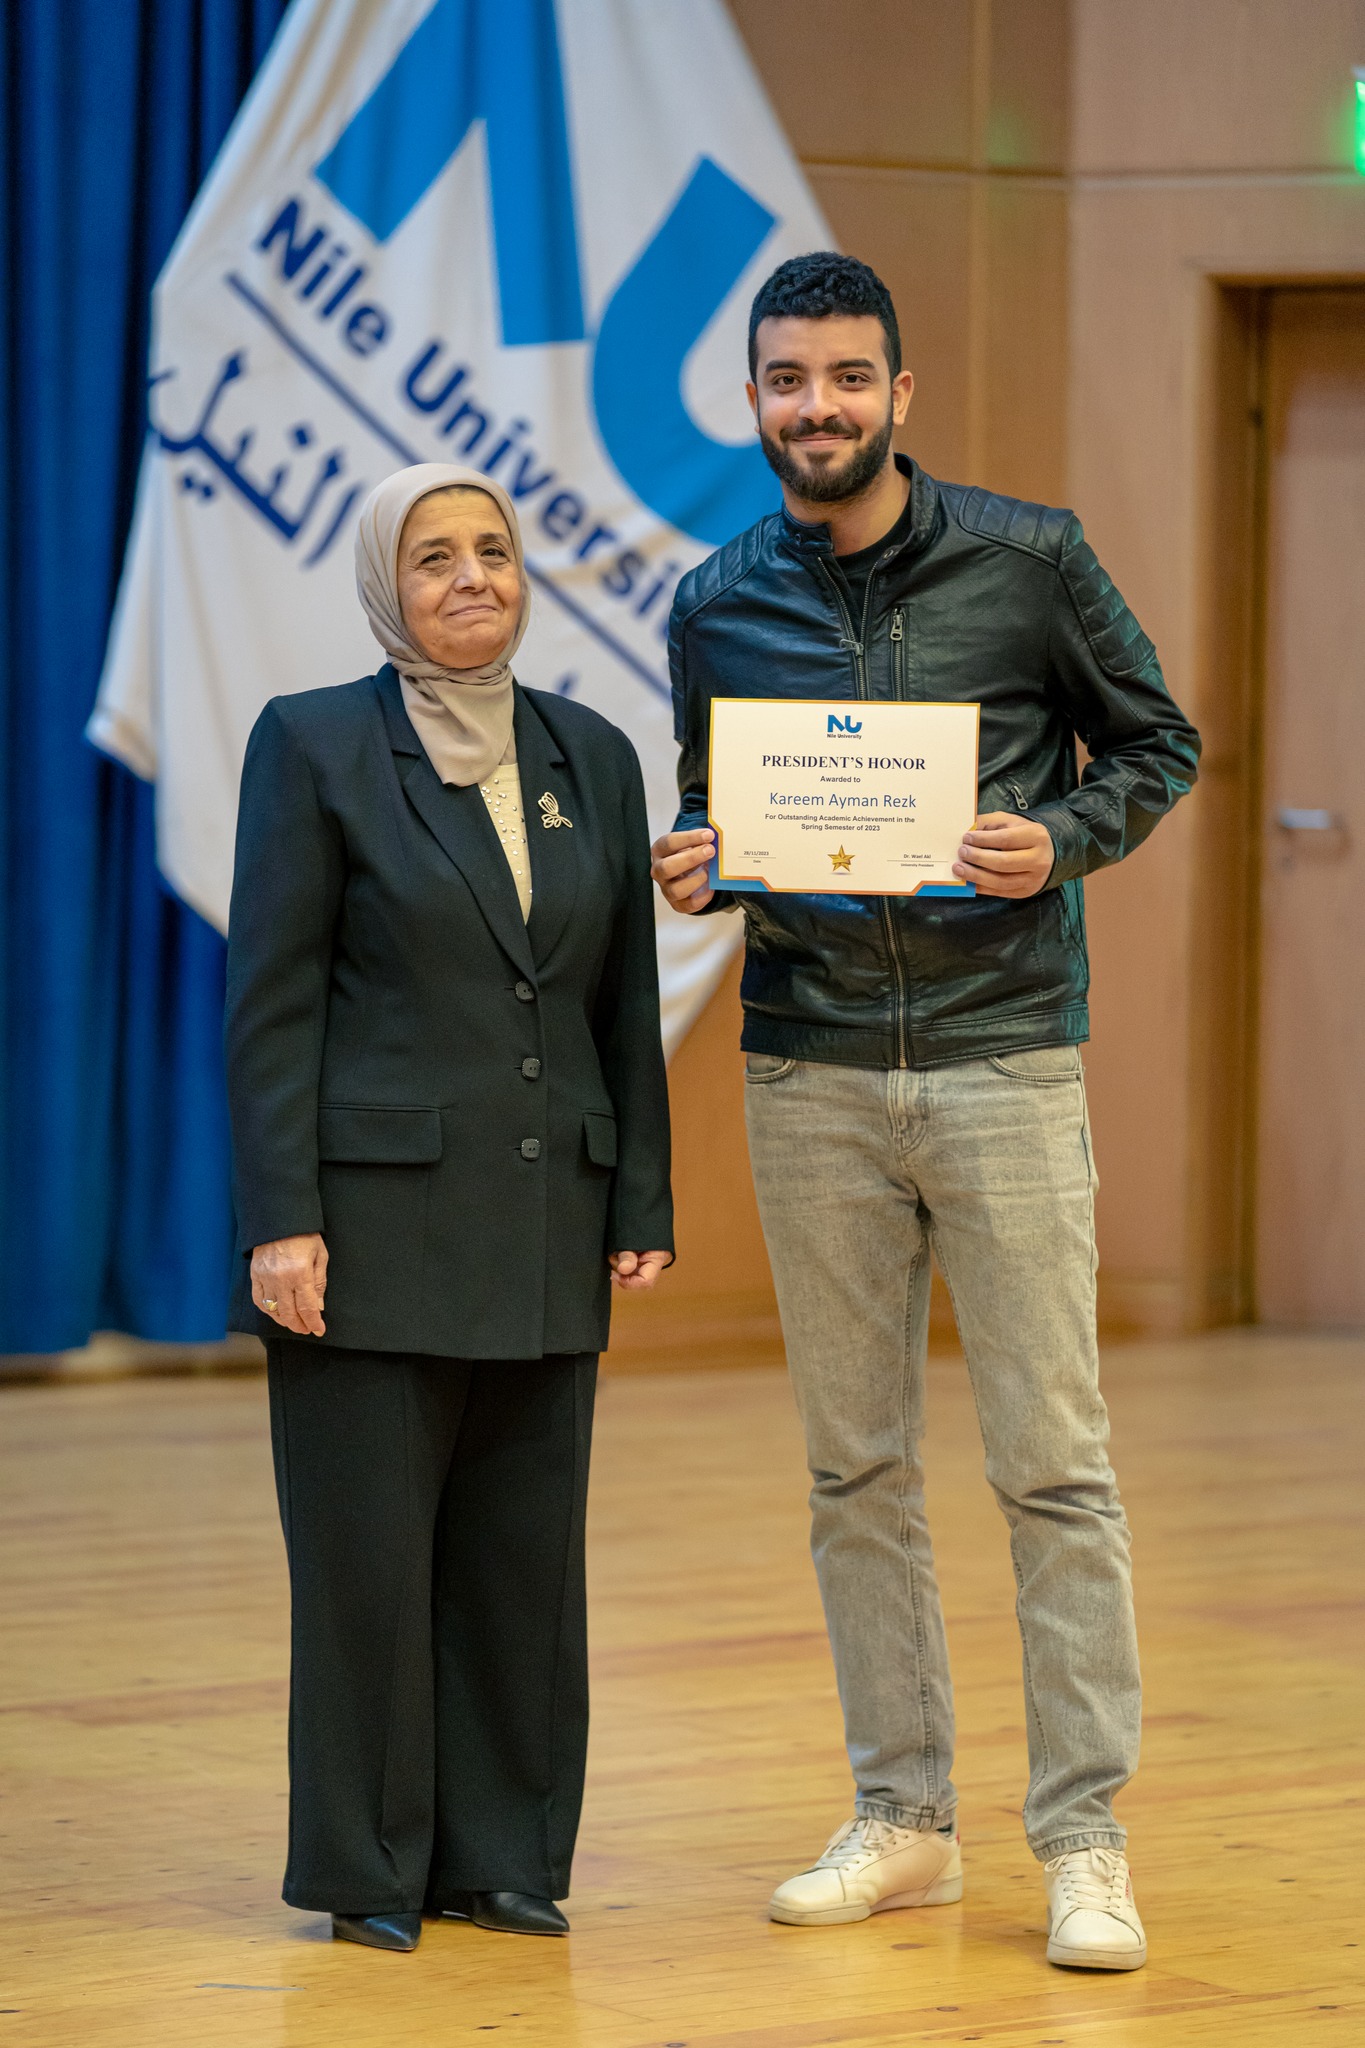 Outstanding President's Honor Students at Nile University